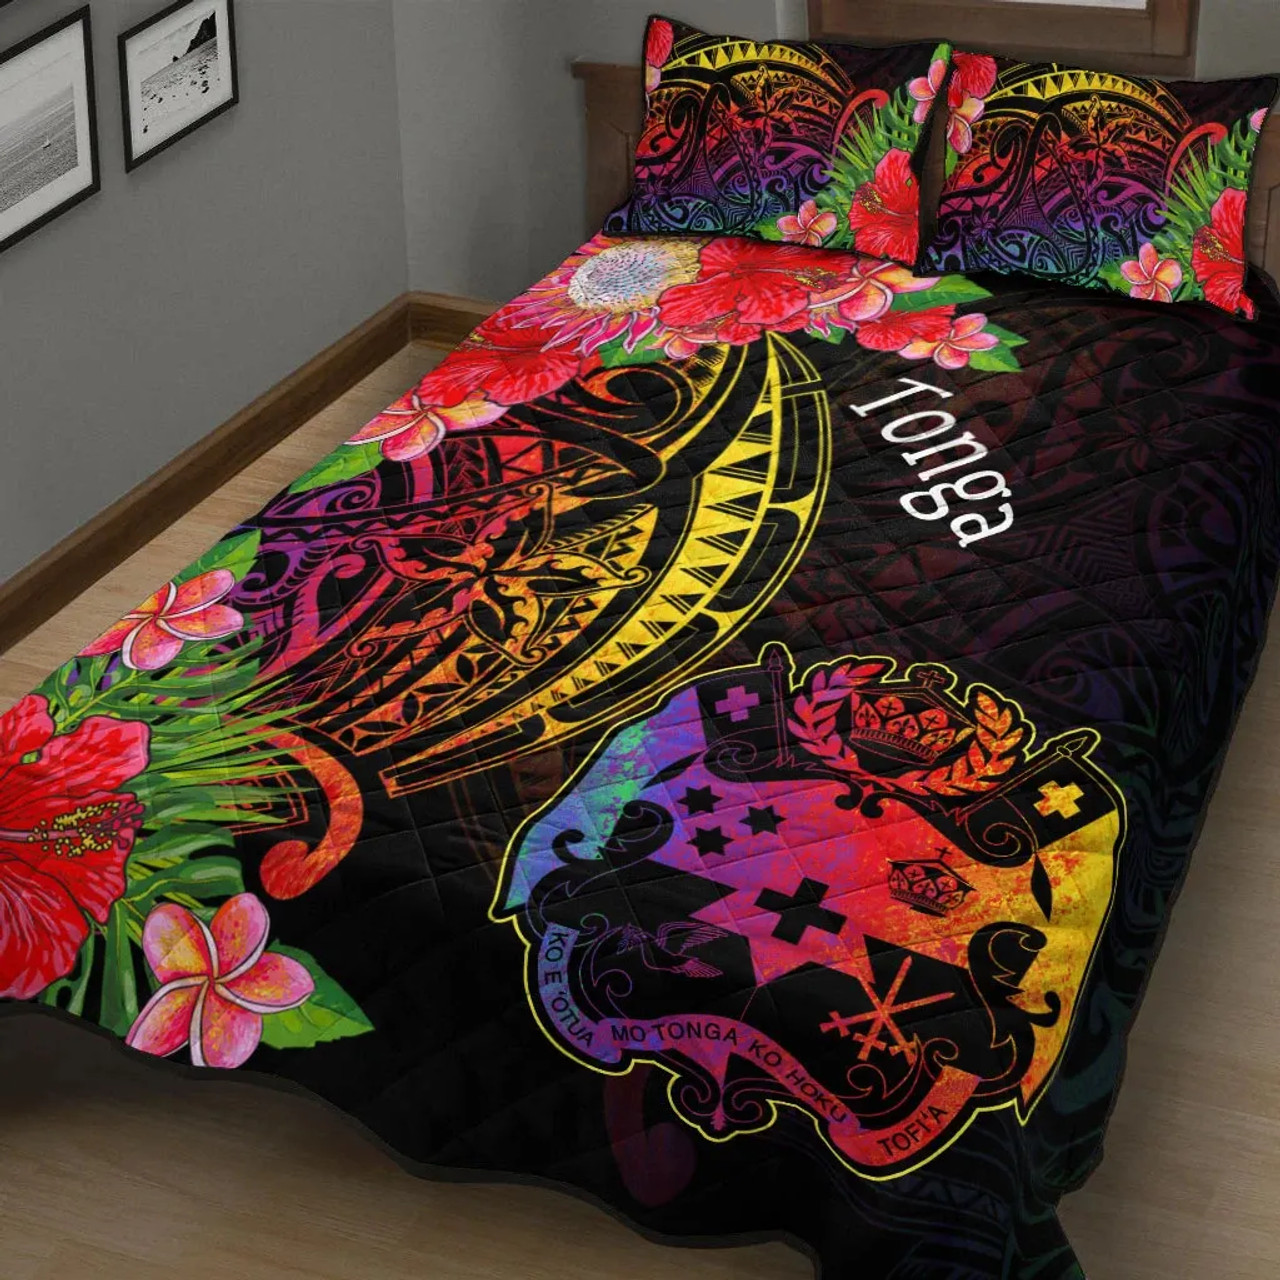 Tonga Quilt Bed Set - Tropical Hippie Style 5